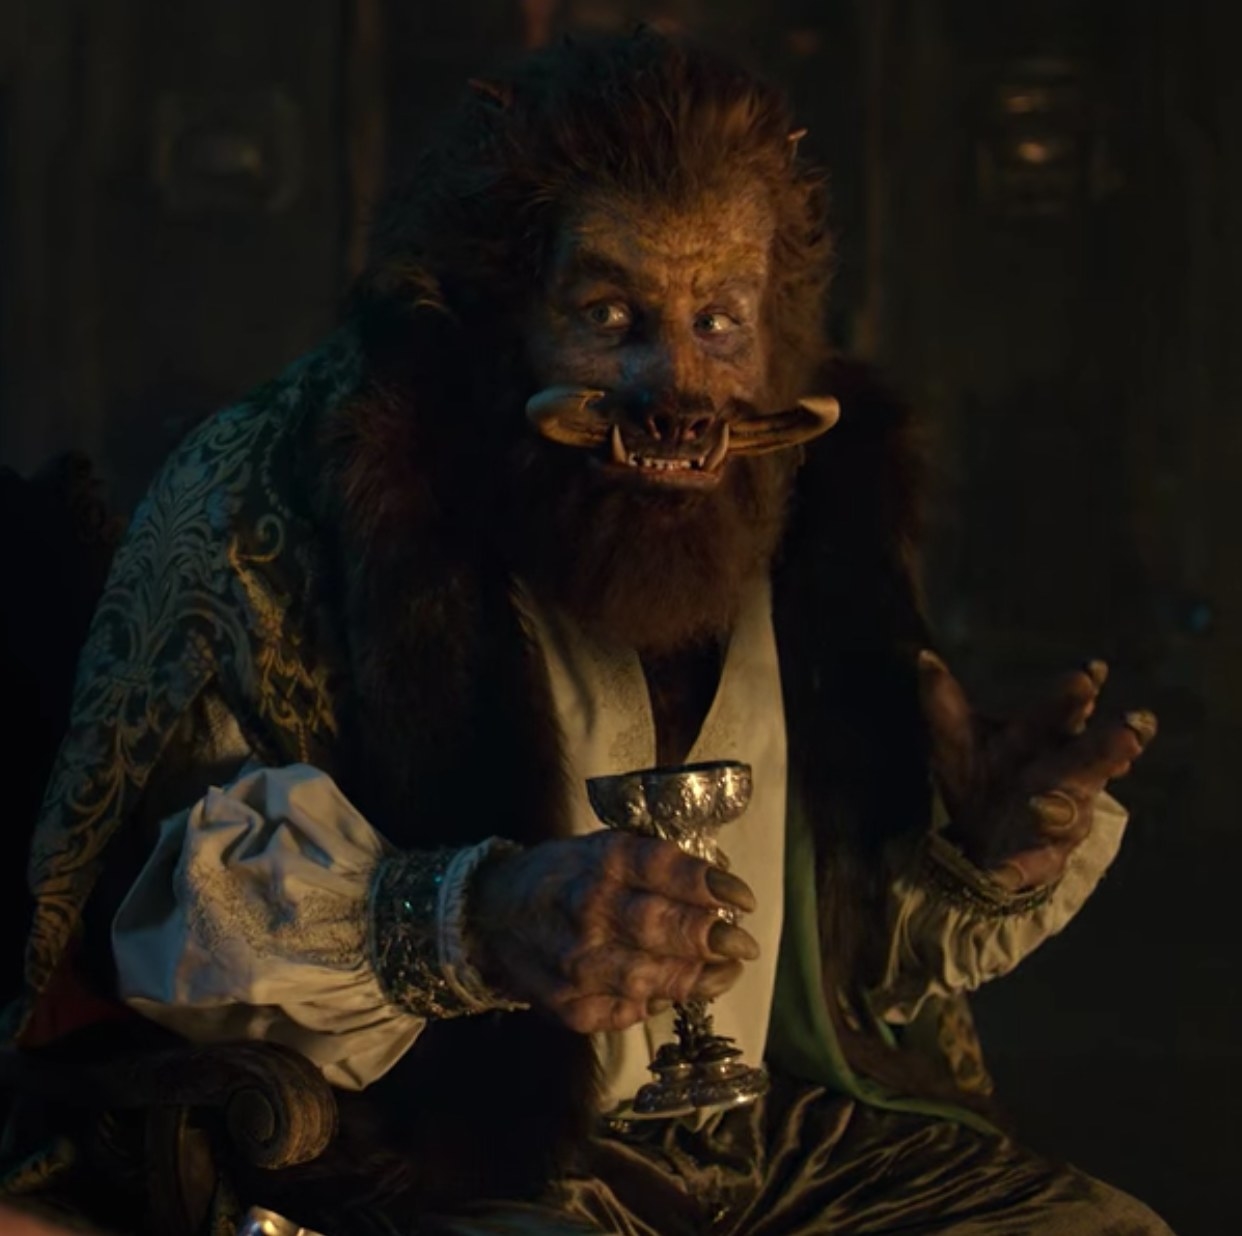 Kristofer Hivju as Nivellen sits and sips a drink in &quot;The Witcher&quot;